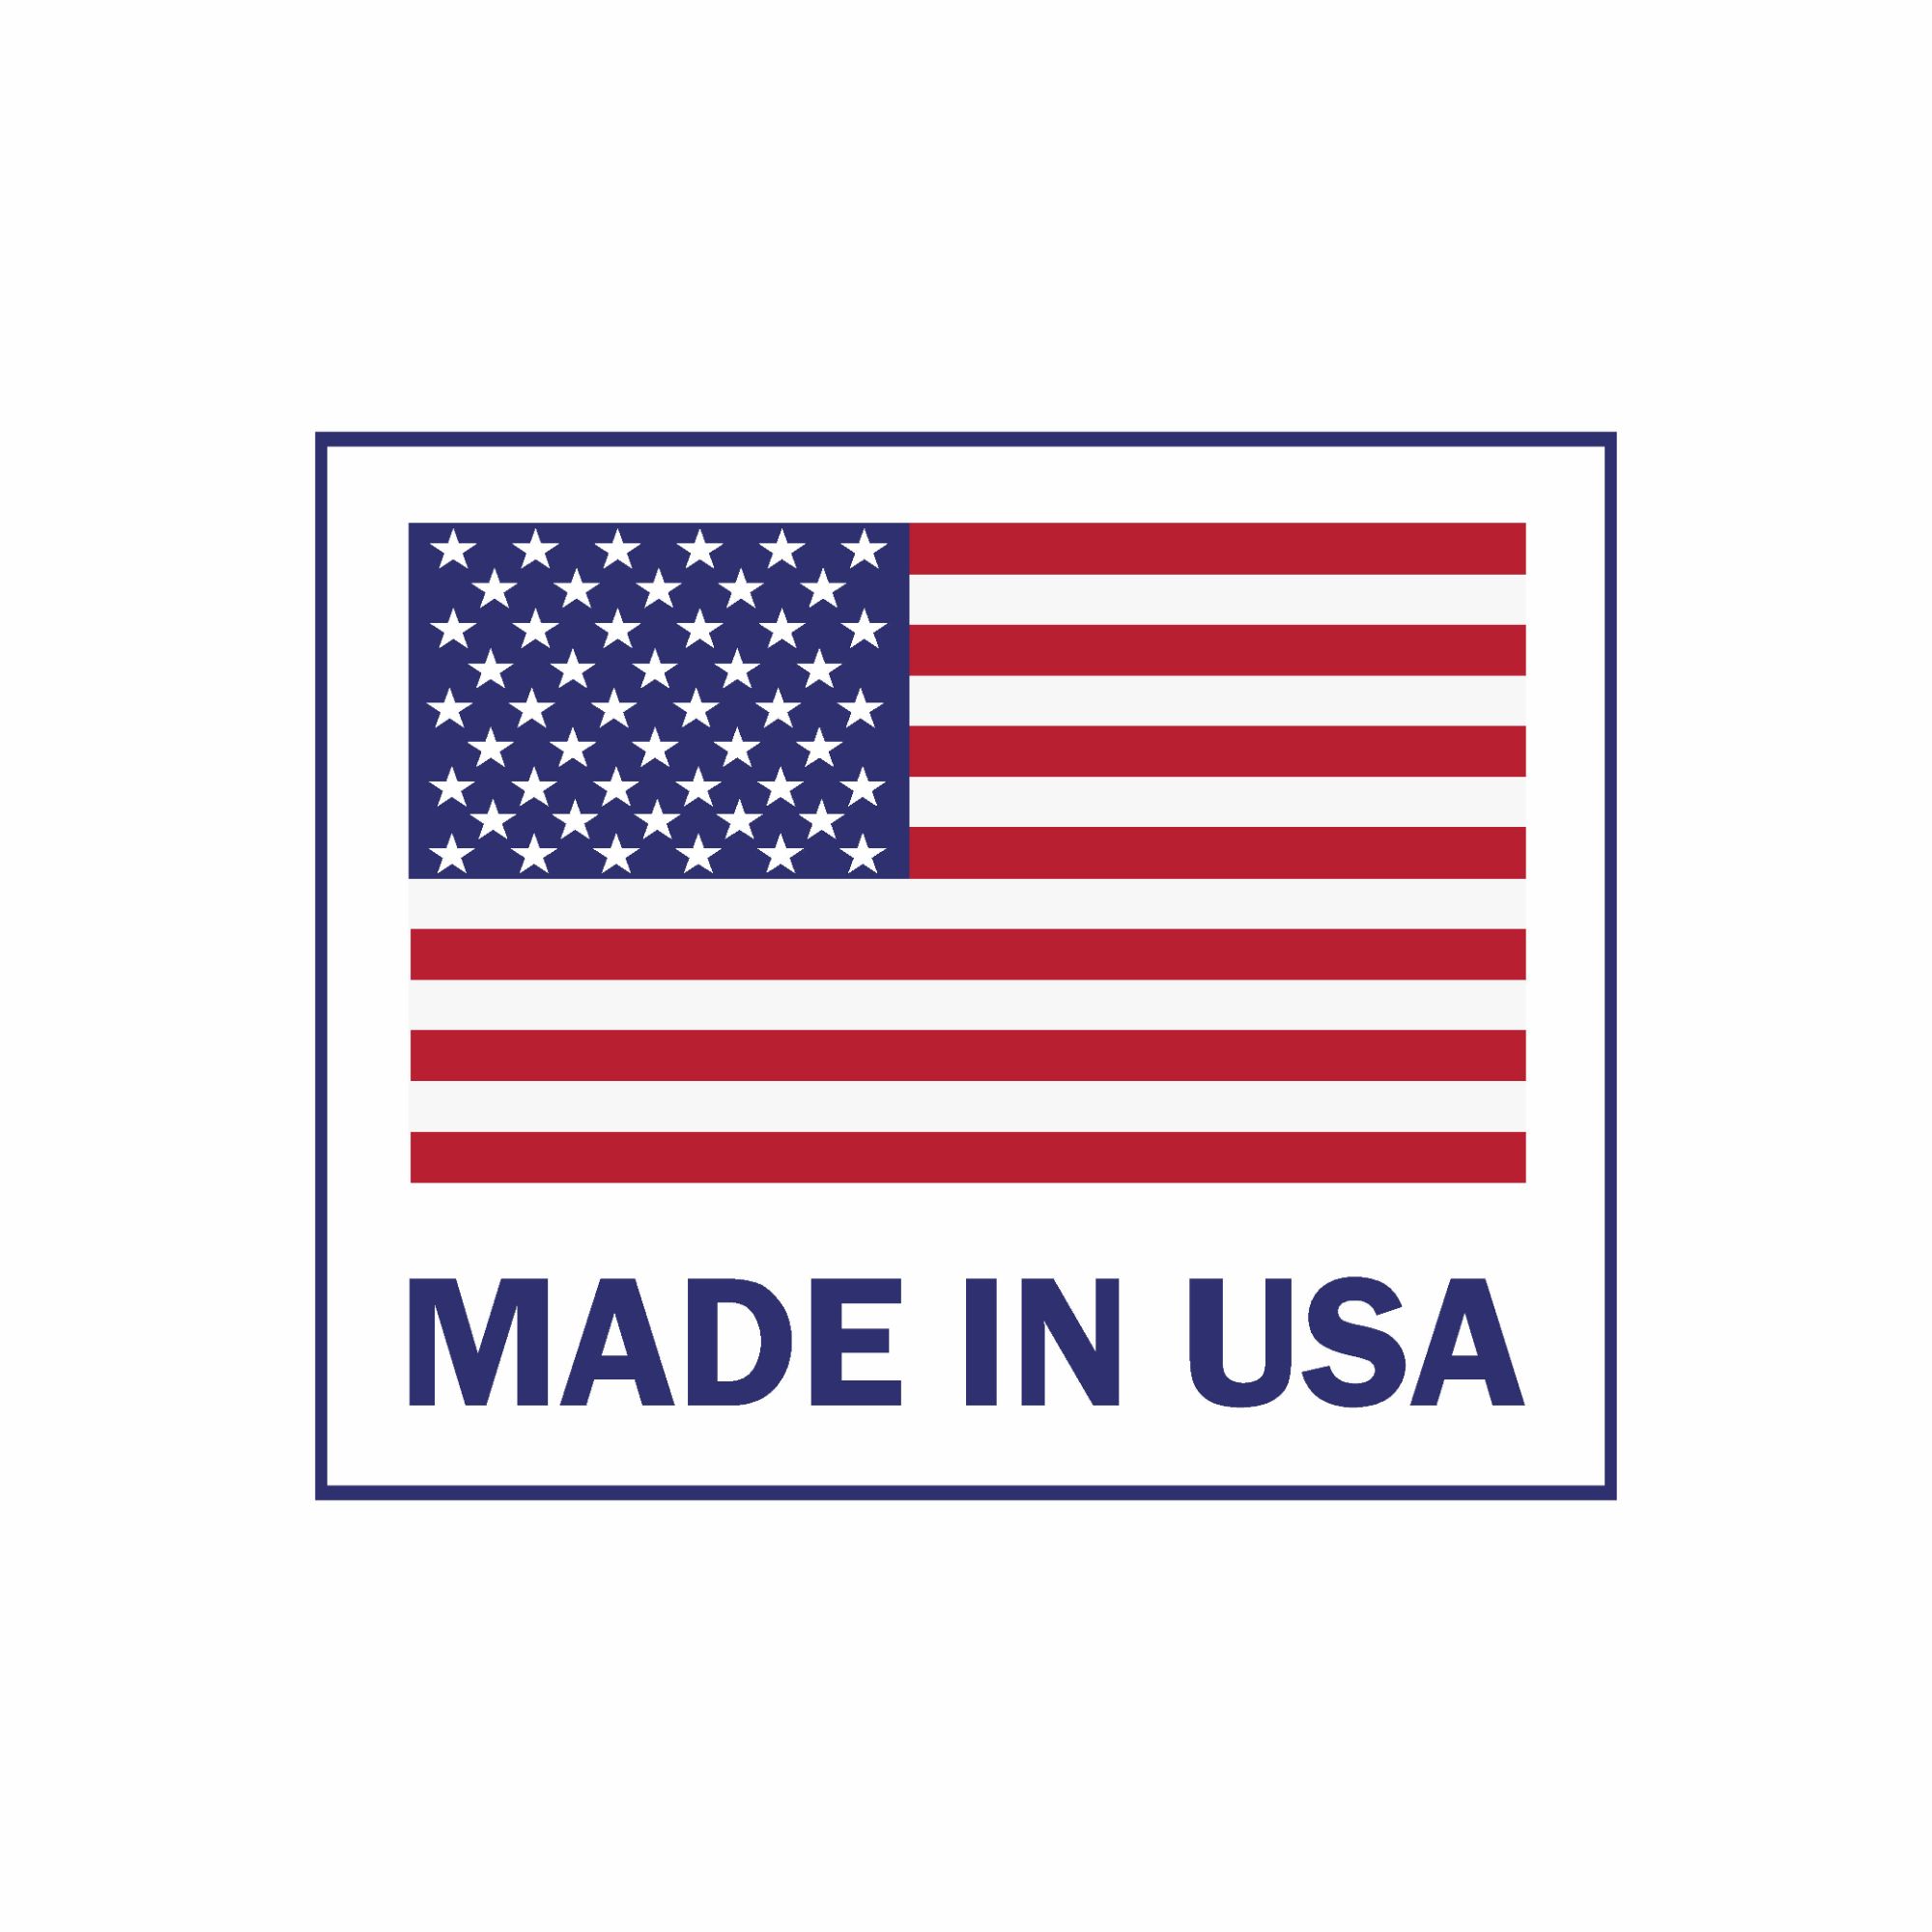 PER-FIL Industries Powder Filling Machine | Made in the USA since 1974